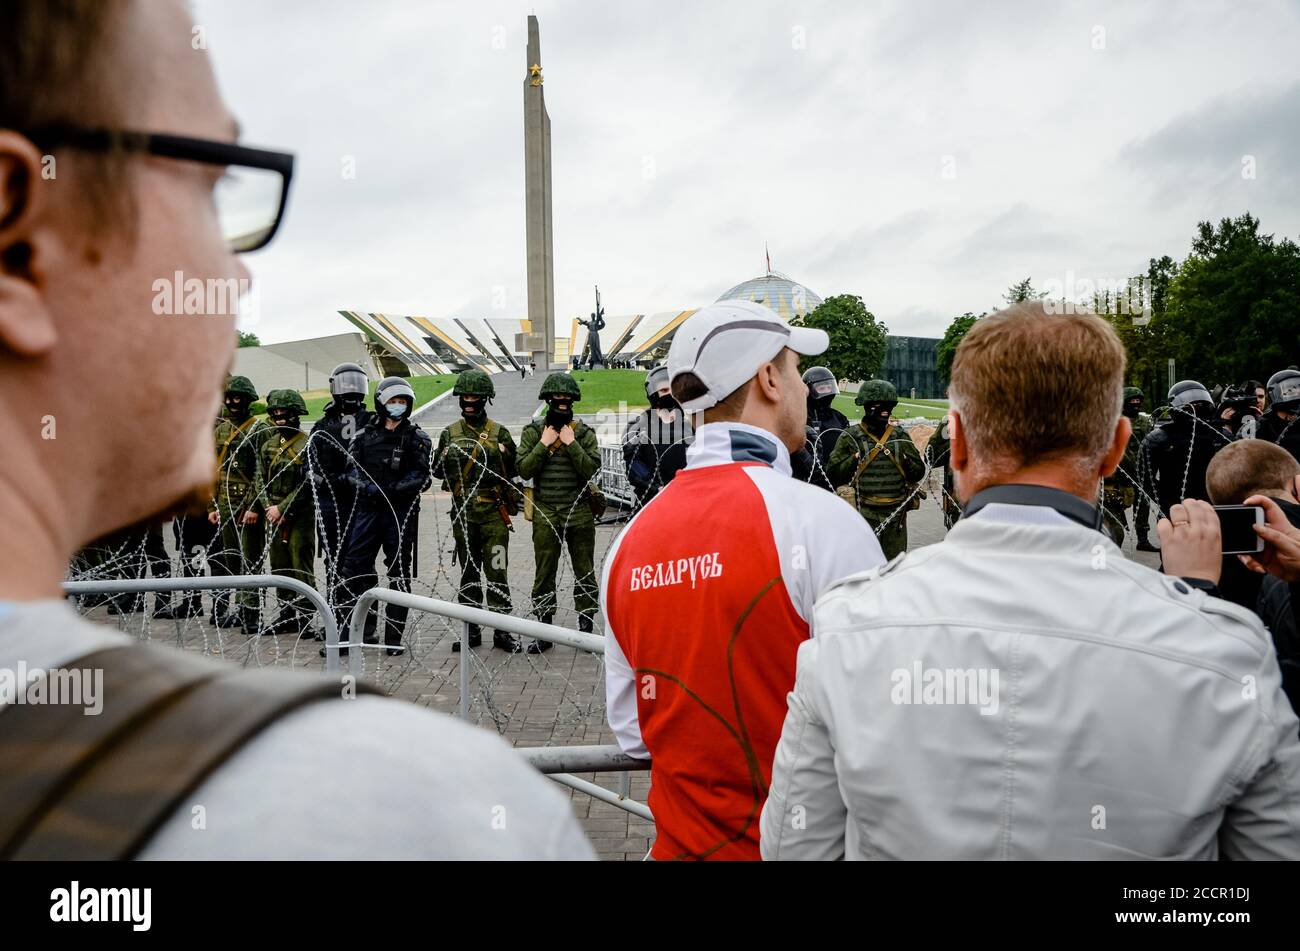 Minsk, Belarus - August 23, 2020: Belarusian people participate in peaceful protest against special police units and soldiers after presidential elect Stock Photo